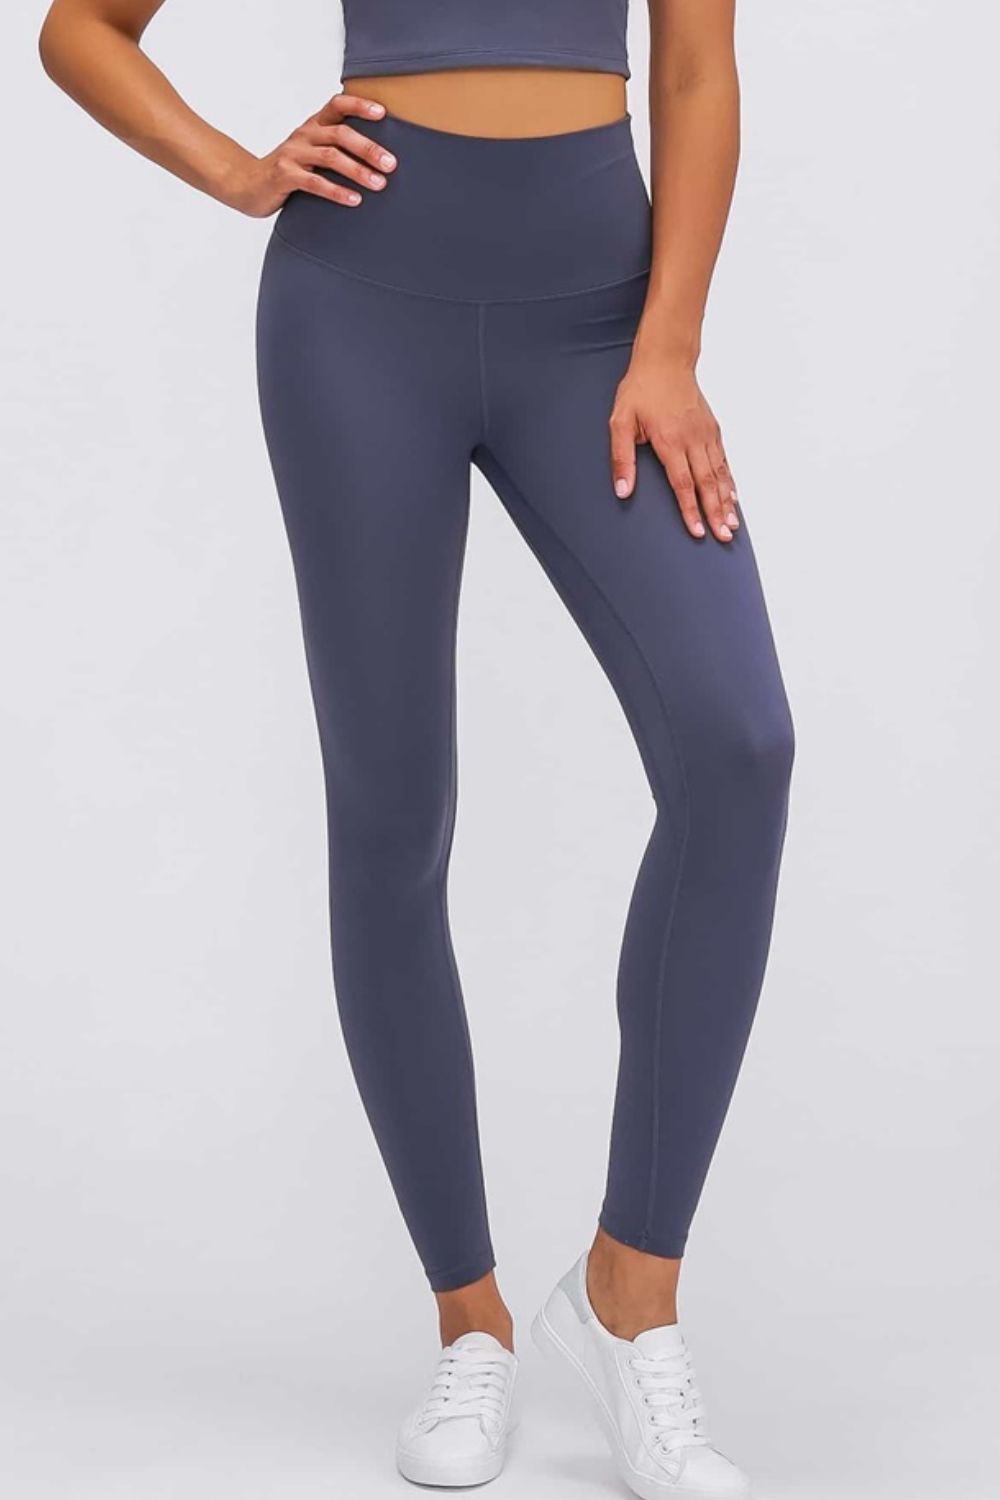 Charlie Paige High Waisted Leggings for Women - Soft Cotton Tummy